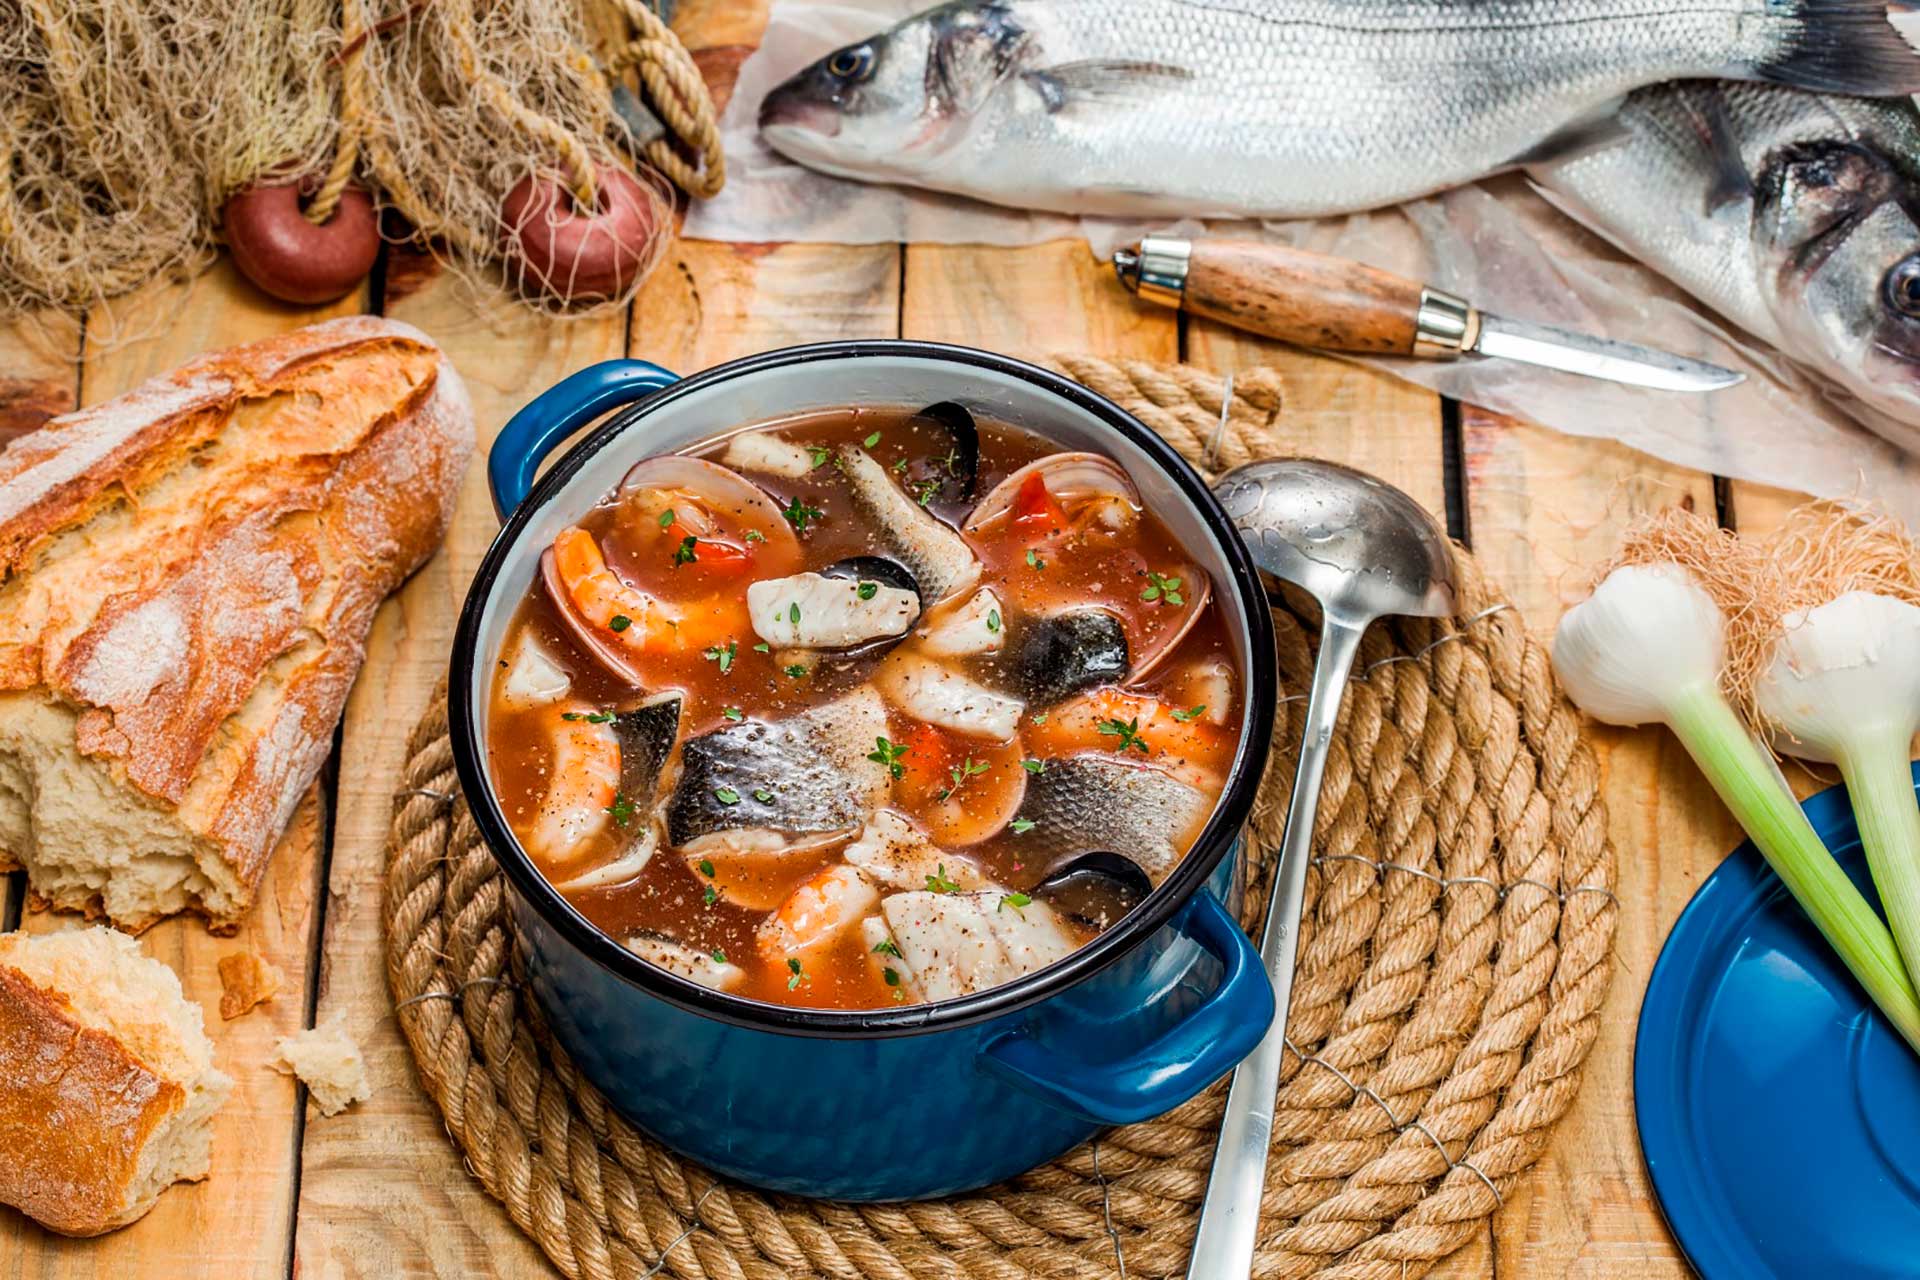 Kefalonia Fisheries / Mediterranean Diet and Healthy Seafood Fats